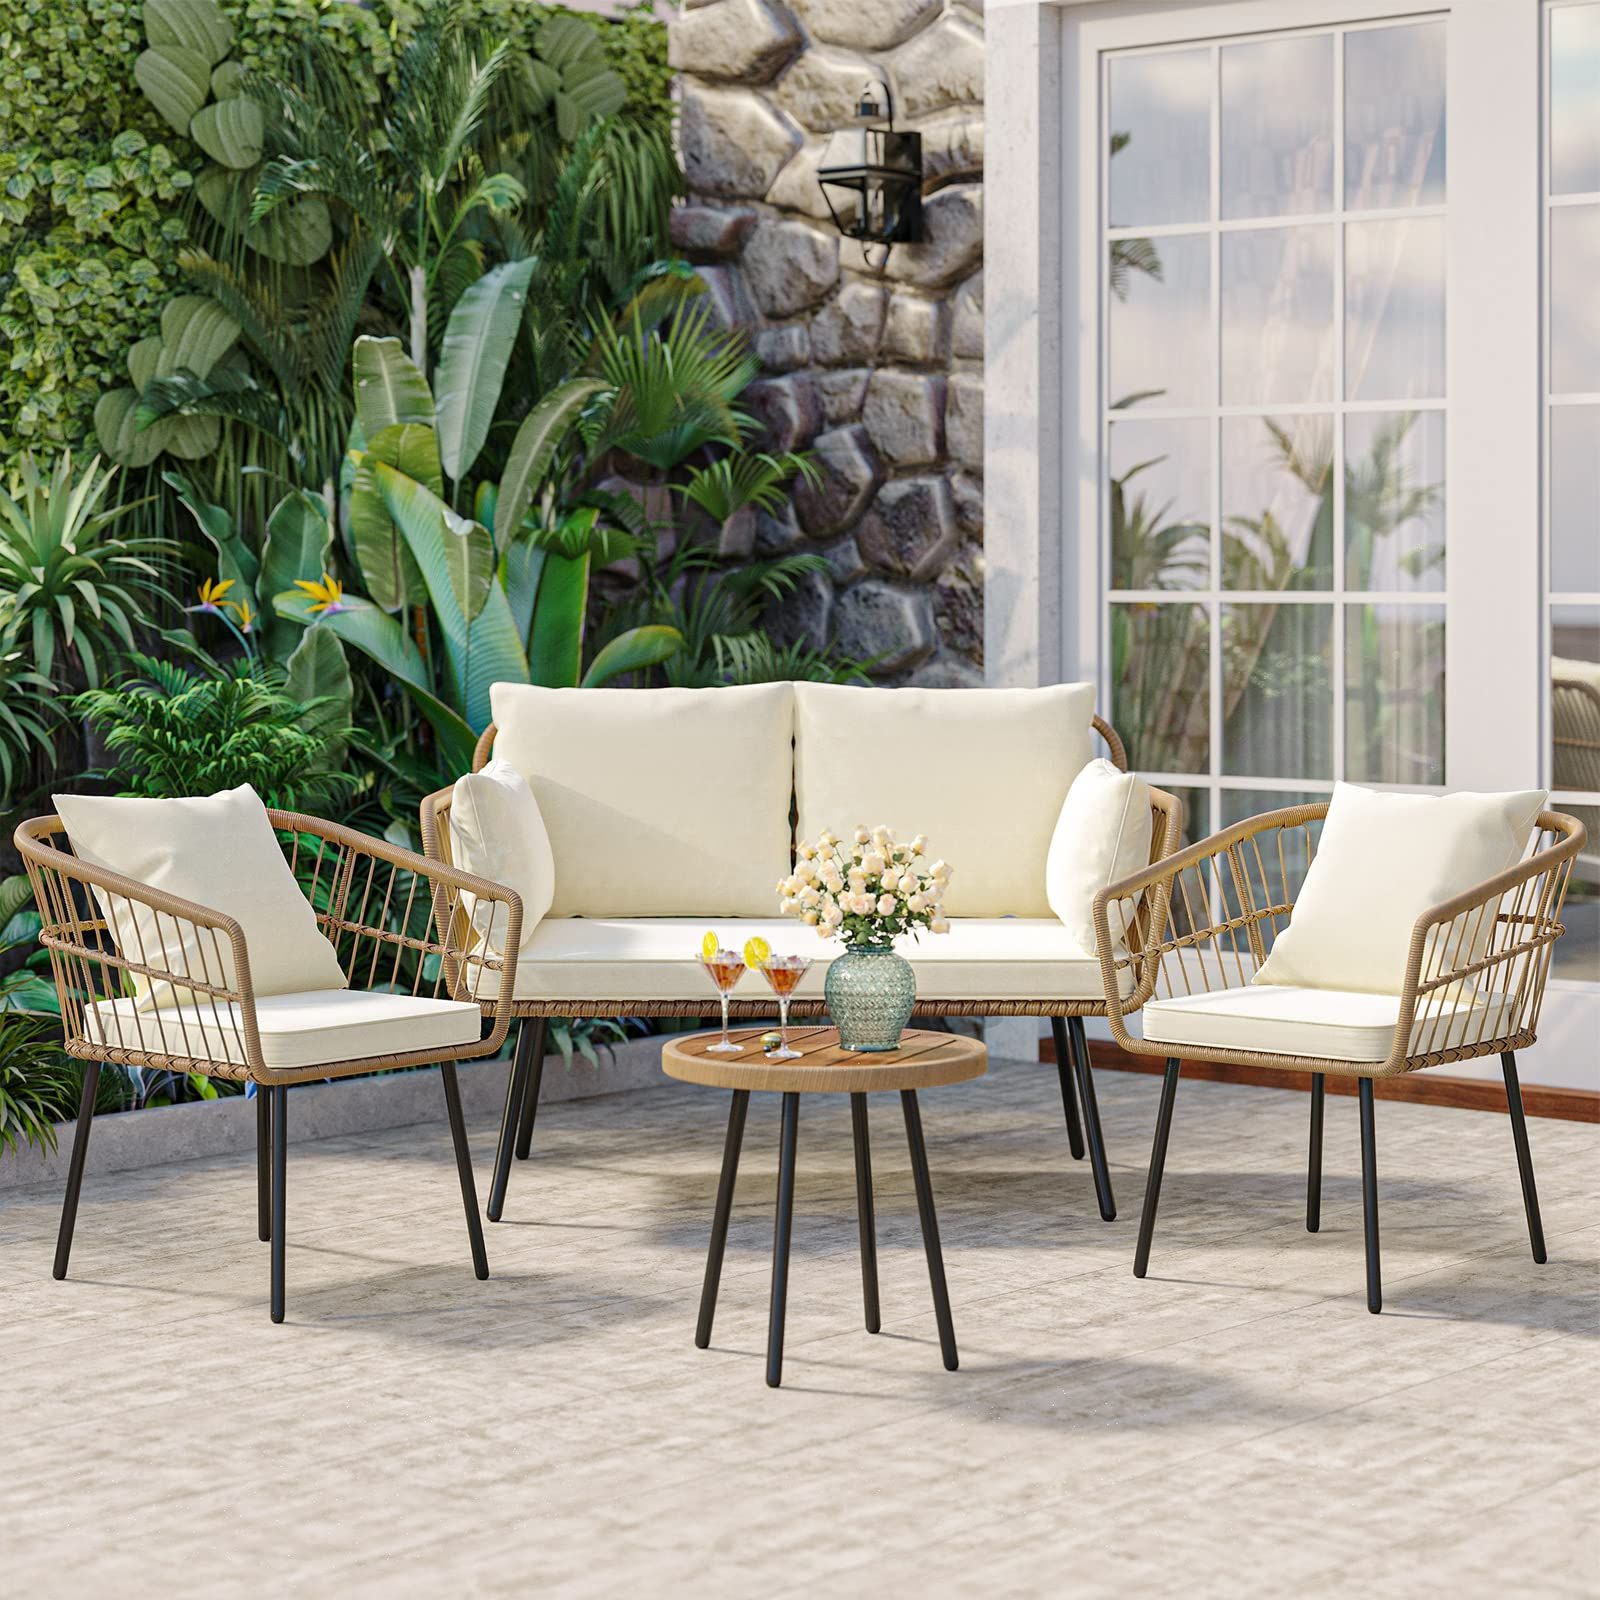 Well Known Amazon: Yitahome 4 Pieces Patio Furniture Set, Wicker Balcony Bistro Set,  Outdoor All Weather Rattan Conversation Set With Loveseat Chairs Table Soft  Cushions For Backyard, Pool, Deck, Garden – Beige : Patio, Lawn Intended For Patio Furniture Wicker Outdoor Bistro Set (View 3 of 15)